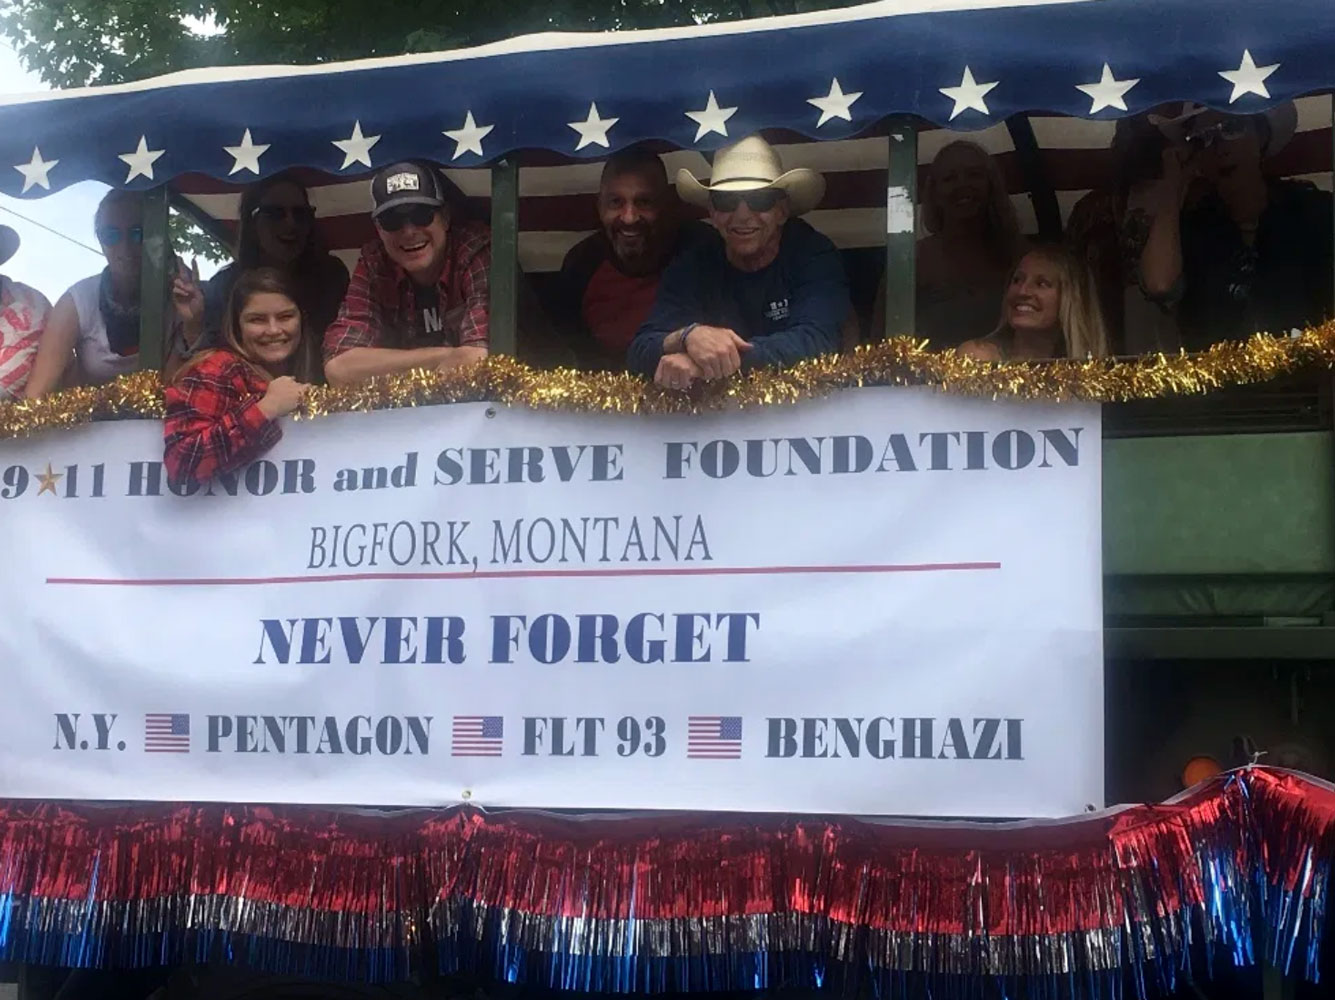 4th of July Parade – Our 2019 Parade Float